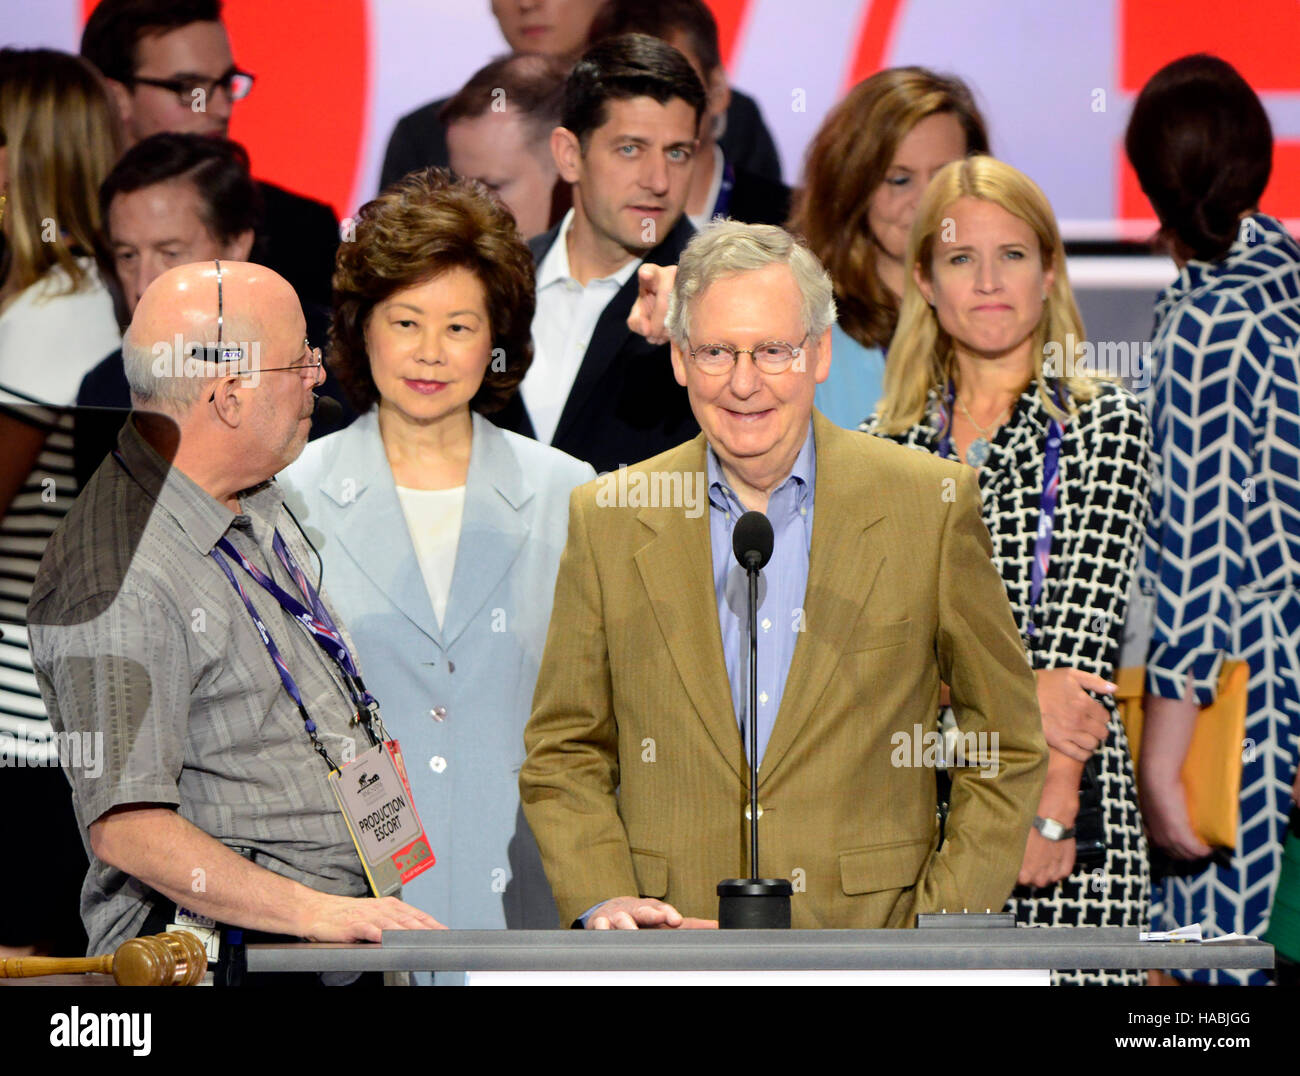 United States Senate Majority Leader Mitch McConnell (Republican of Kentucky) and his wife, Elaine Chao participate in a rehearsal prior to the 2016 Republican National Convention in Cleveland, Ohio on Sunday, July 17, 2016. Standing behind them and pointing is US Speaker of the House Paul Ryan (Republican of Wisconsin) and his wife Janna. Credit: Ron Sachs/CNP (RESTRICTION: NO New York or New Jersey Newspapers or newspapers within a 75 mile radius of New York City) /MediaPunch /MediaPunch Stock Photo